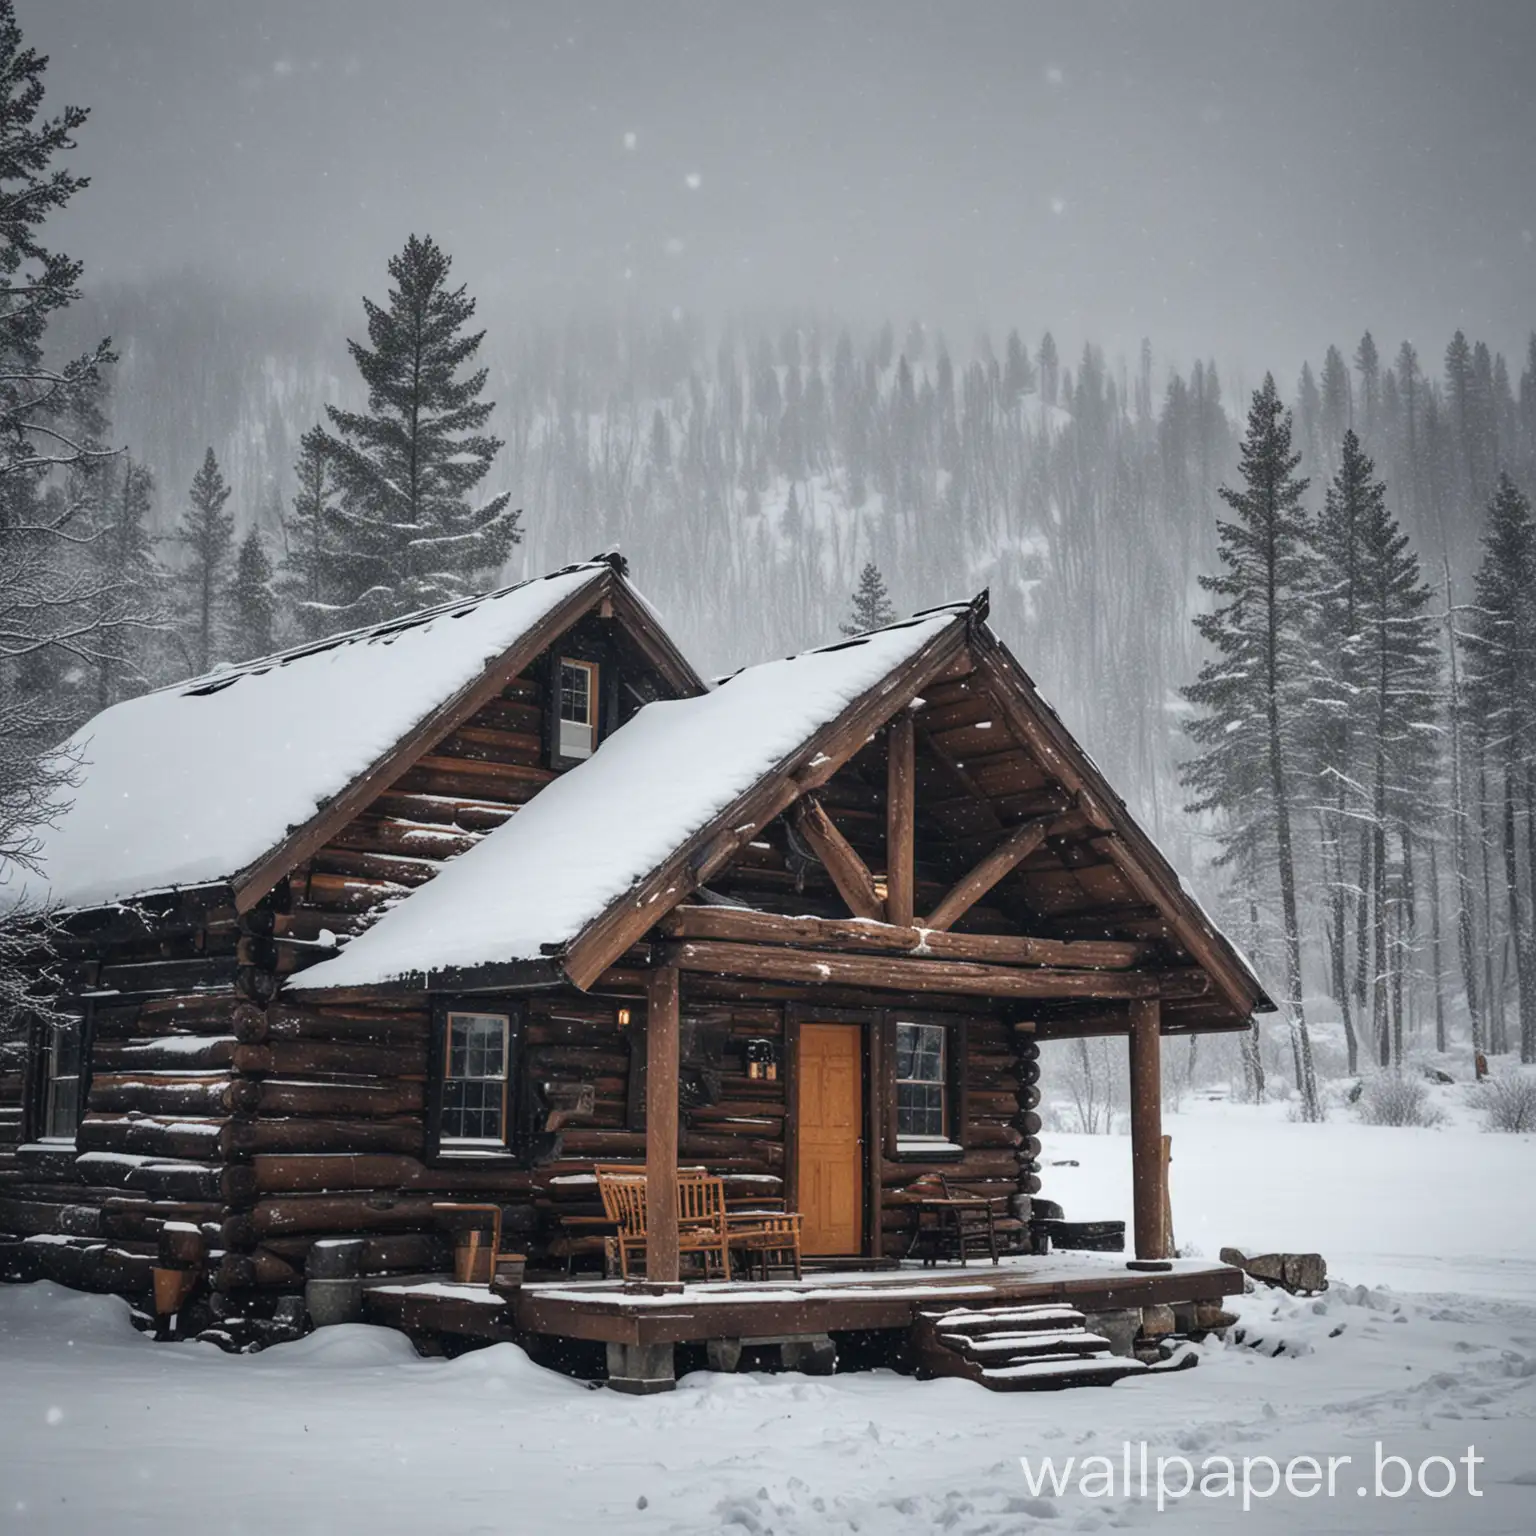 Snowy-Cabin-in-the-Winter-Mountains-Cozy-Retreat-Amidst-a-Blizzard